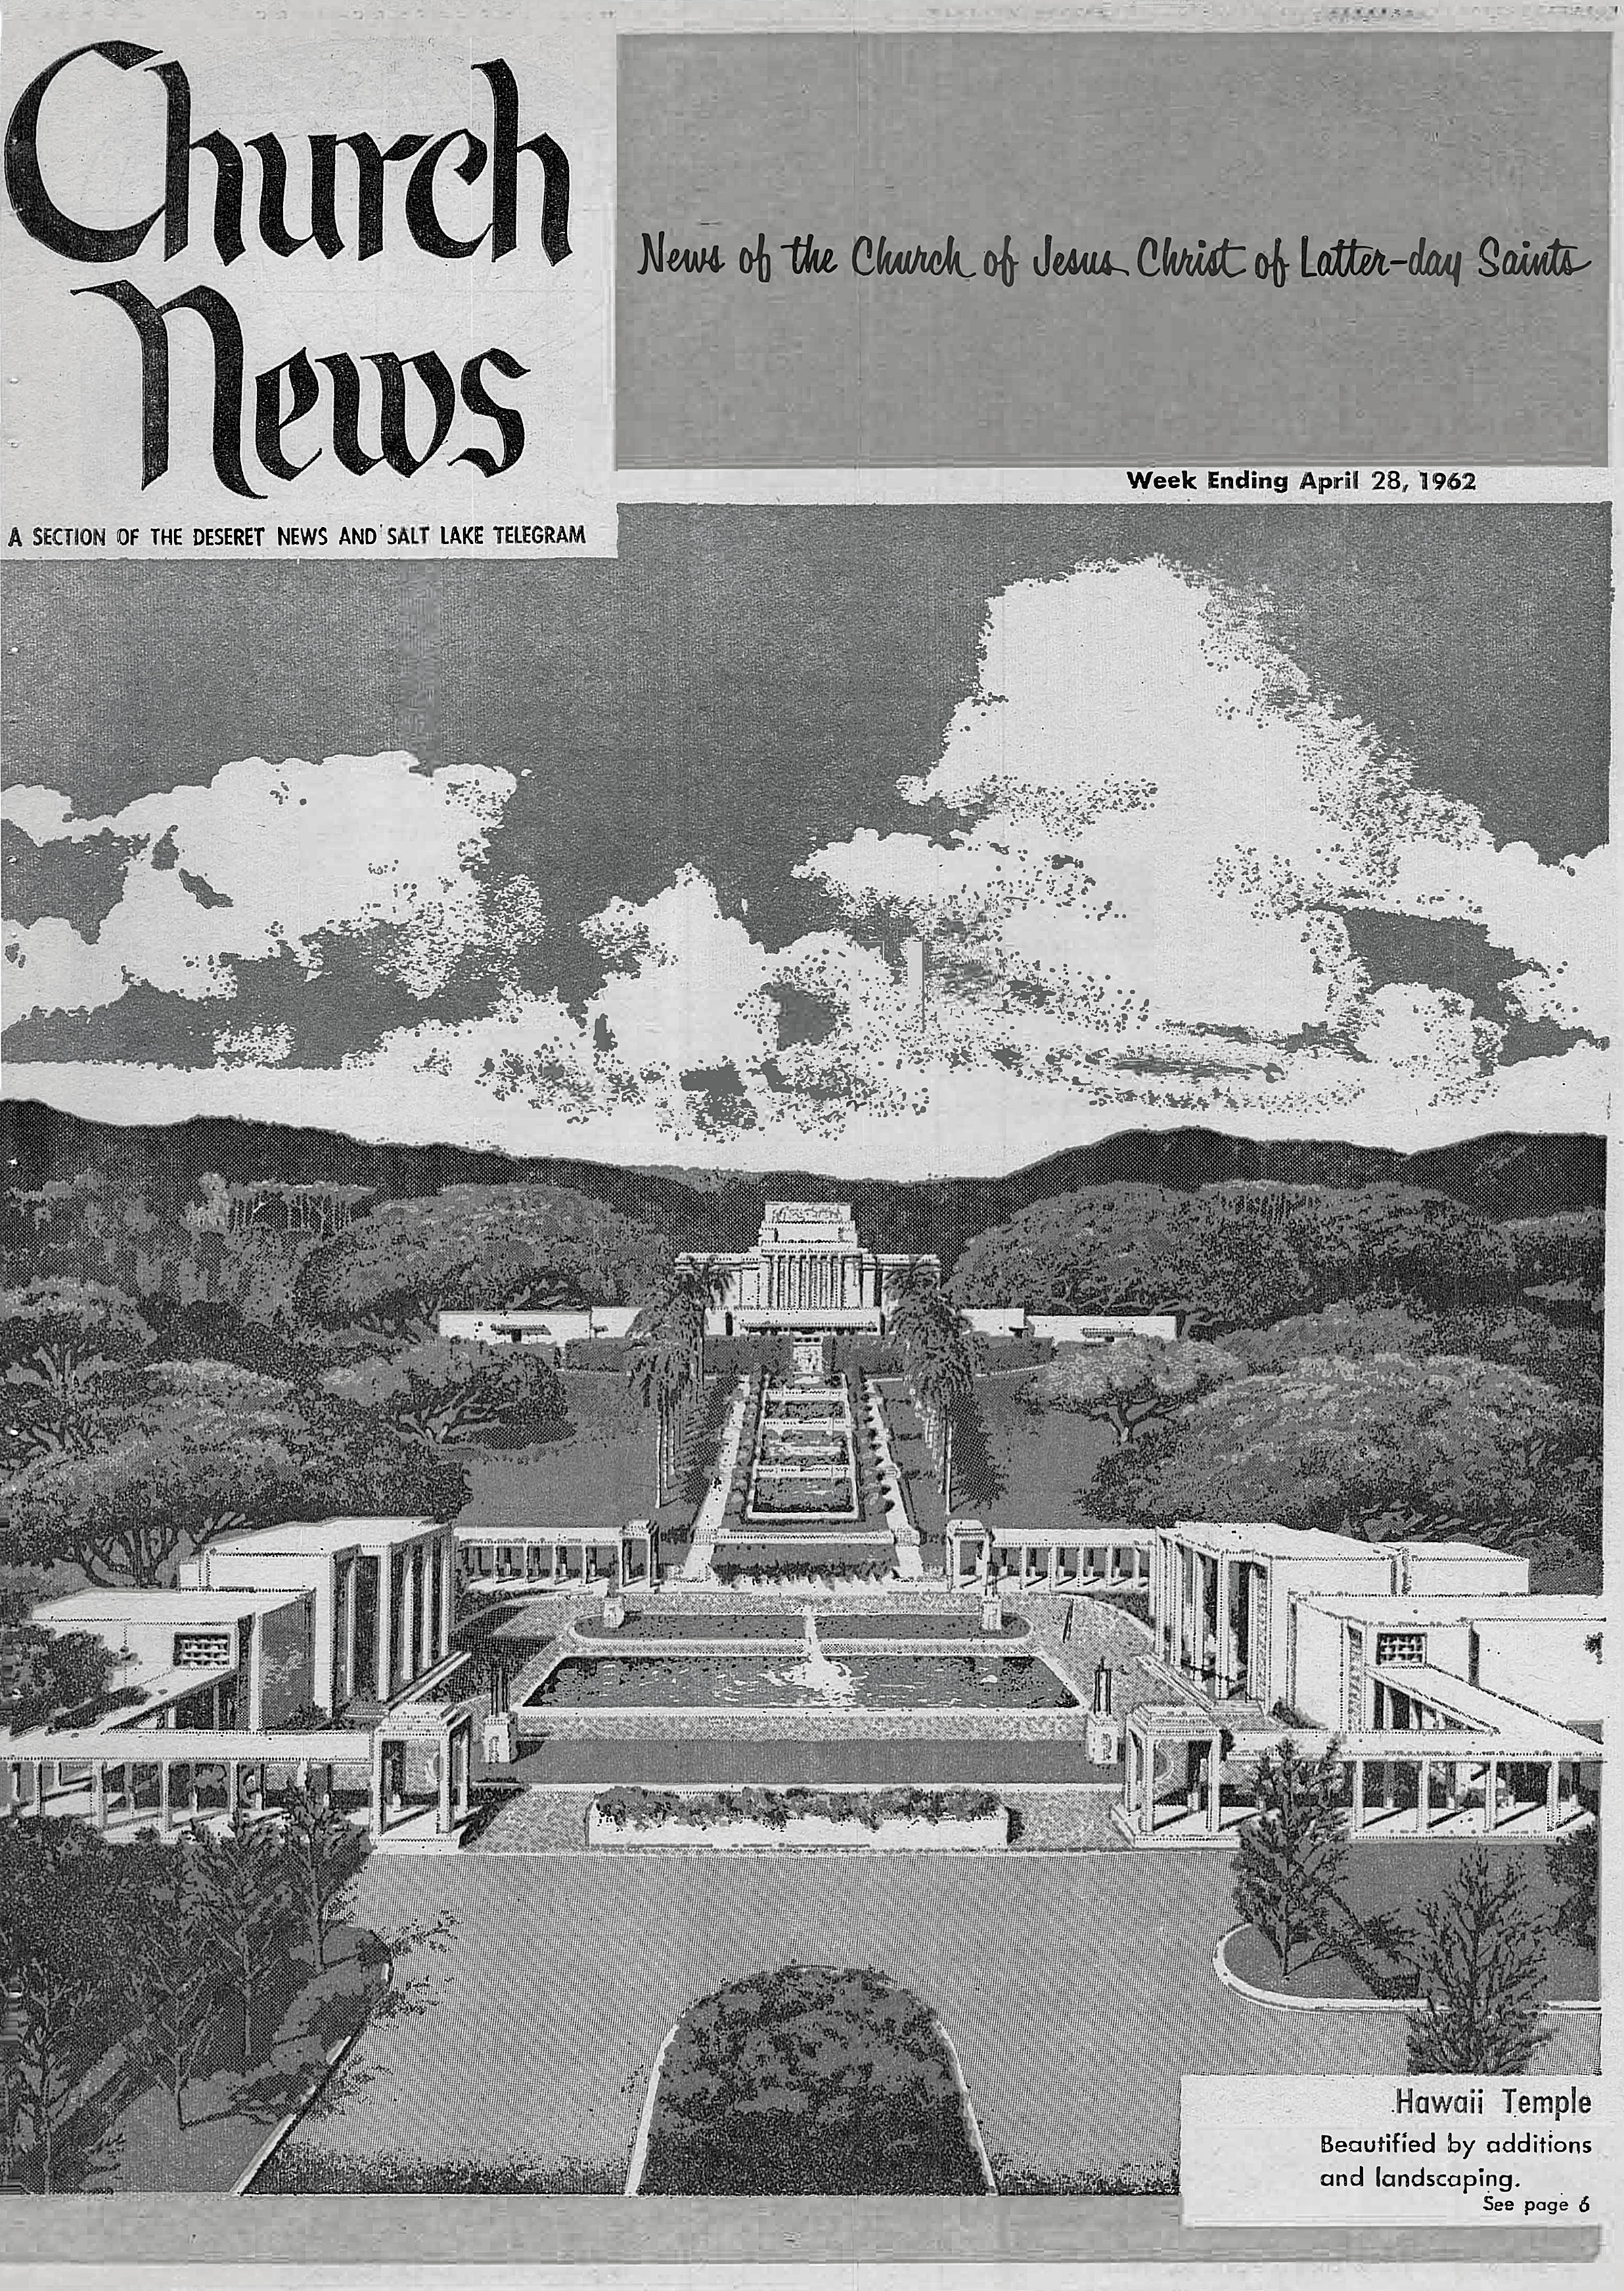 This cover illustrates the plan for the Hawaii Temple and its grounds, improvements that would coincide with additions made to the college and with the construction of the Polynesian Cultural Center. Courtesy of Church News.